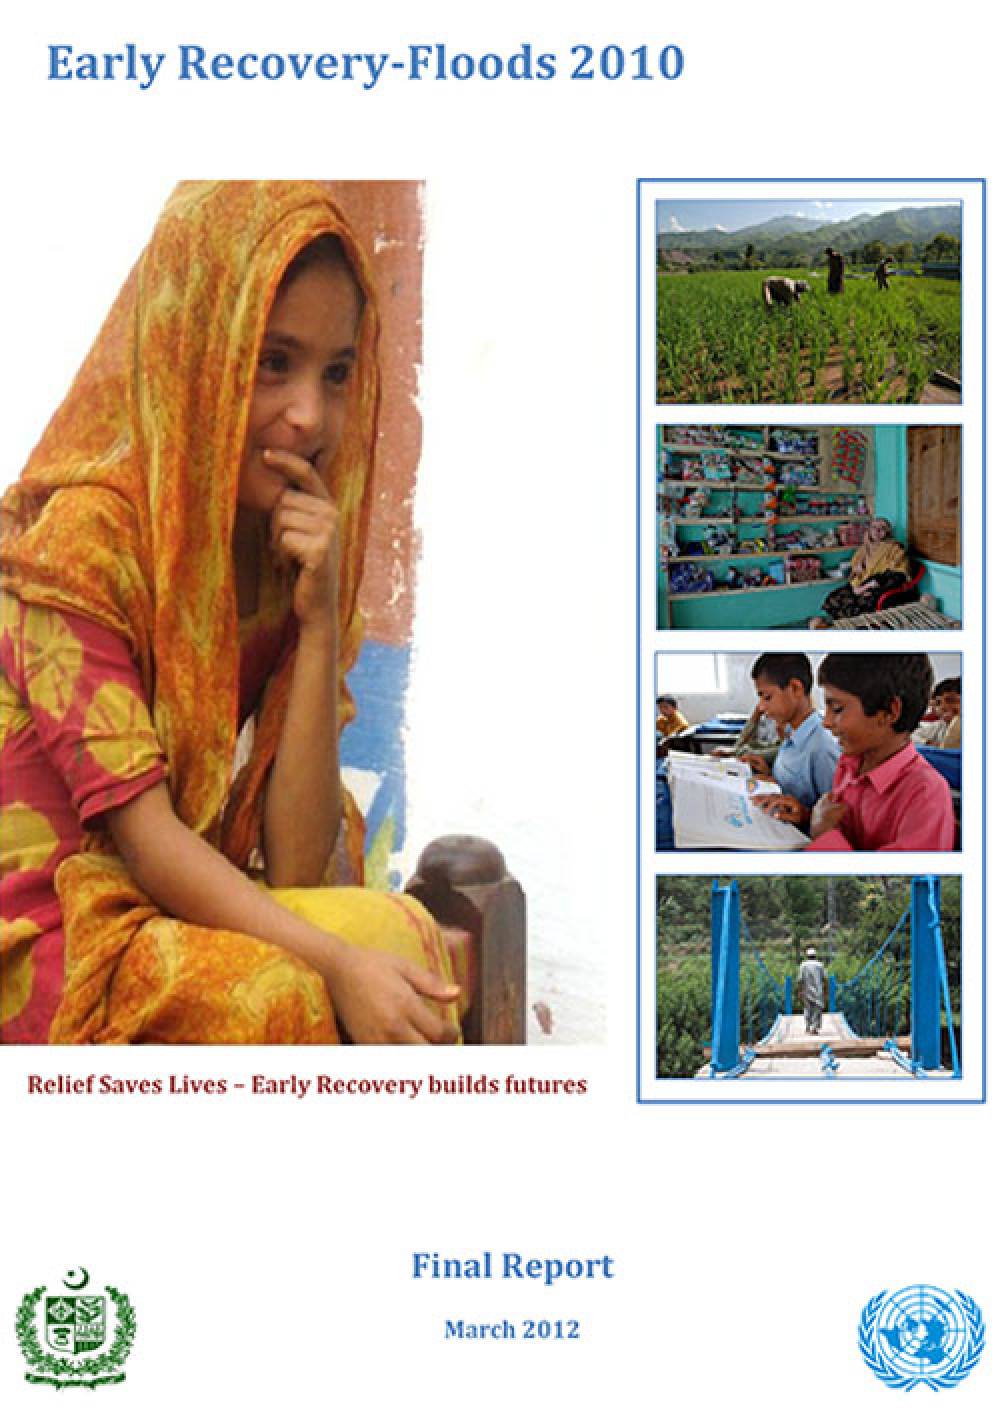 Pakistan Floods Disaster 2010 Early Recovery Report